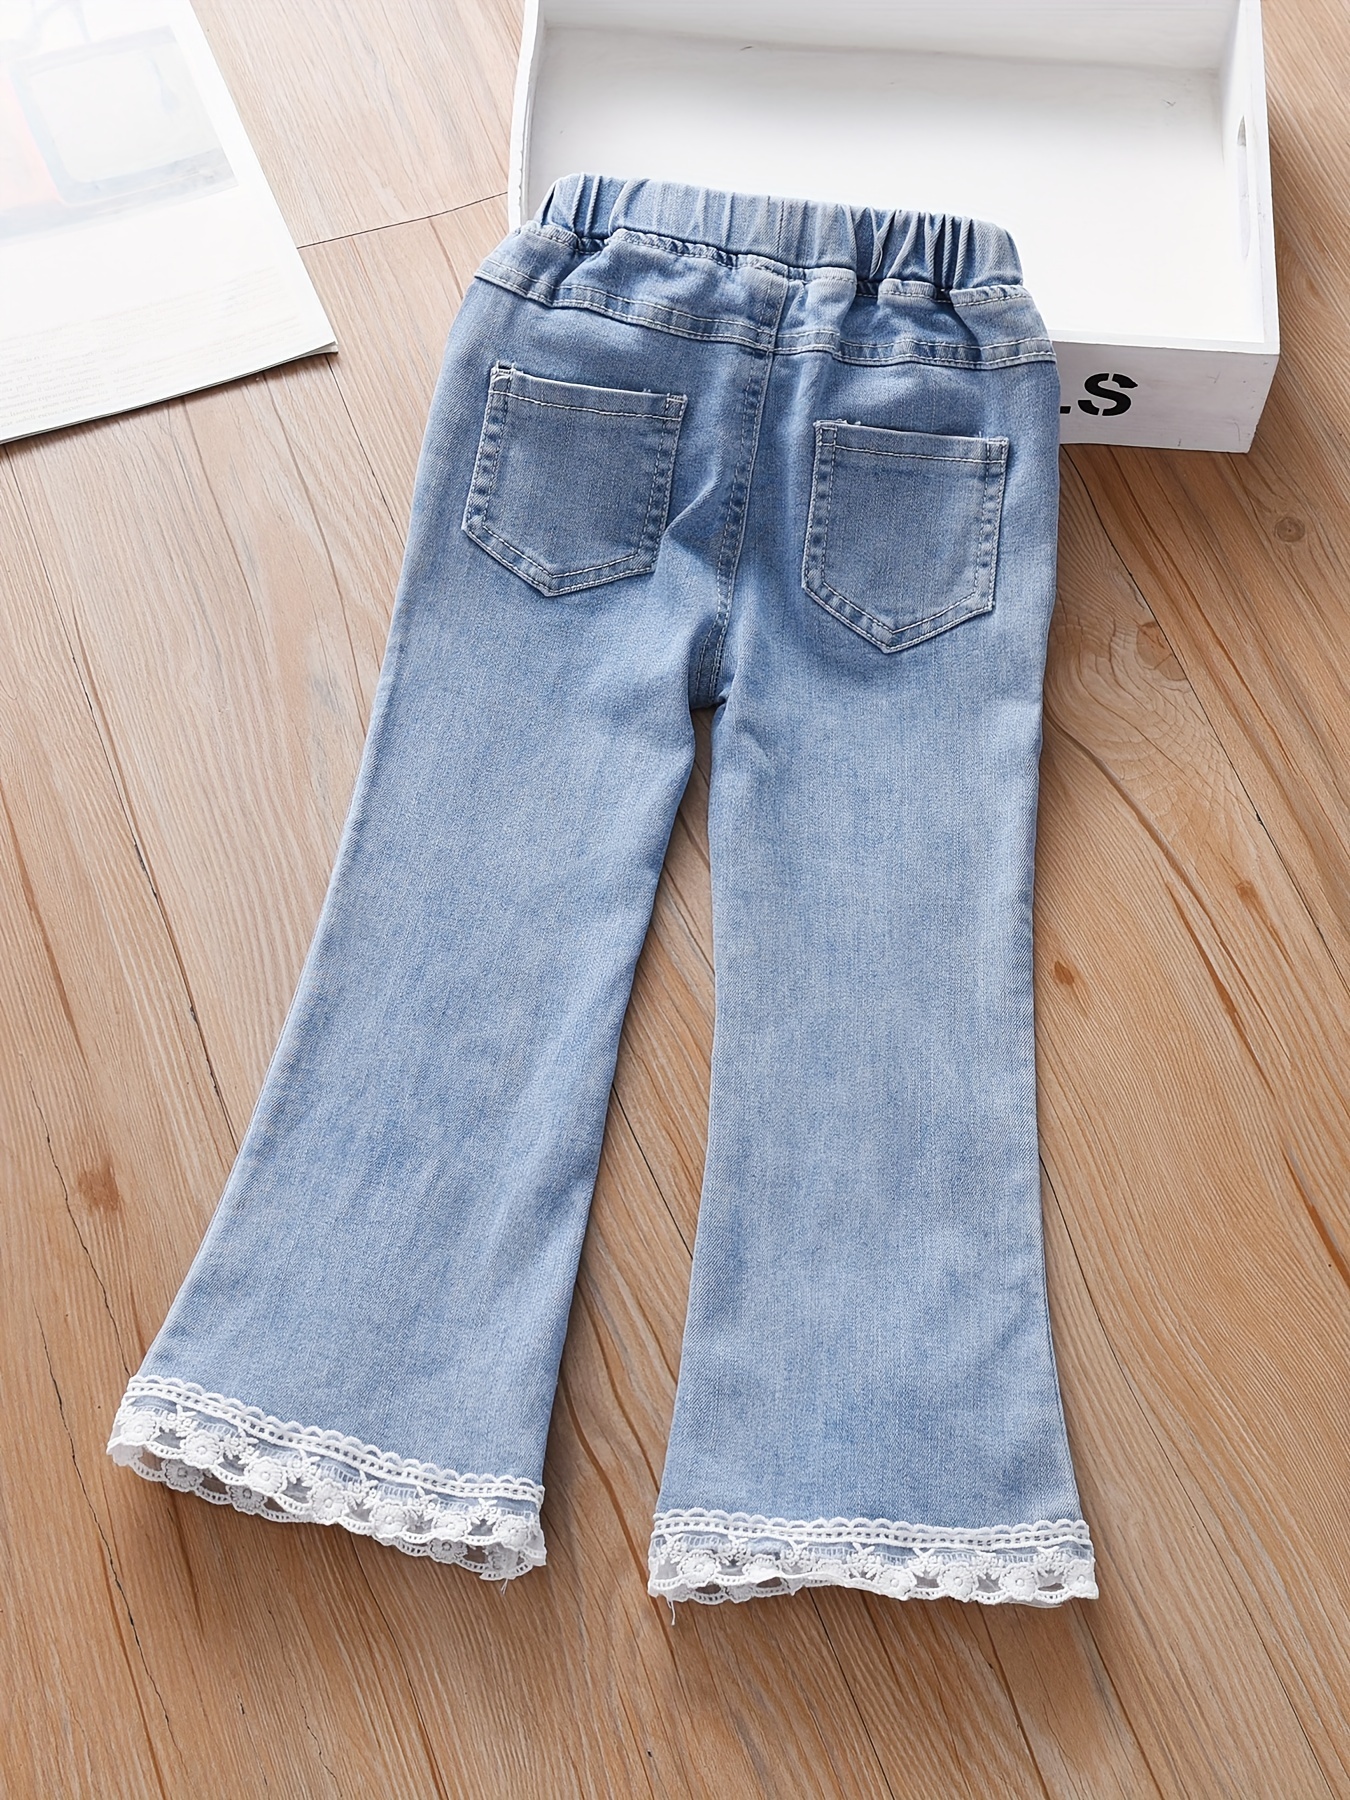 Fashion Bell-Bottomed Pants Spring Autumn Denim Flared Pants Jean